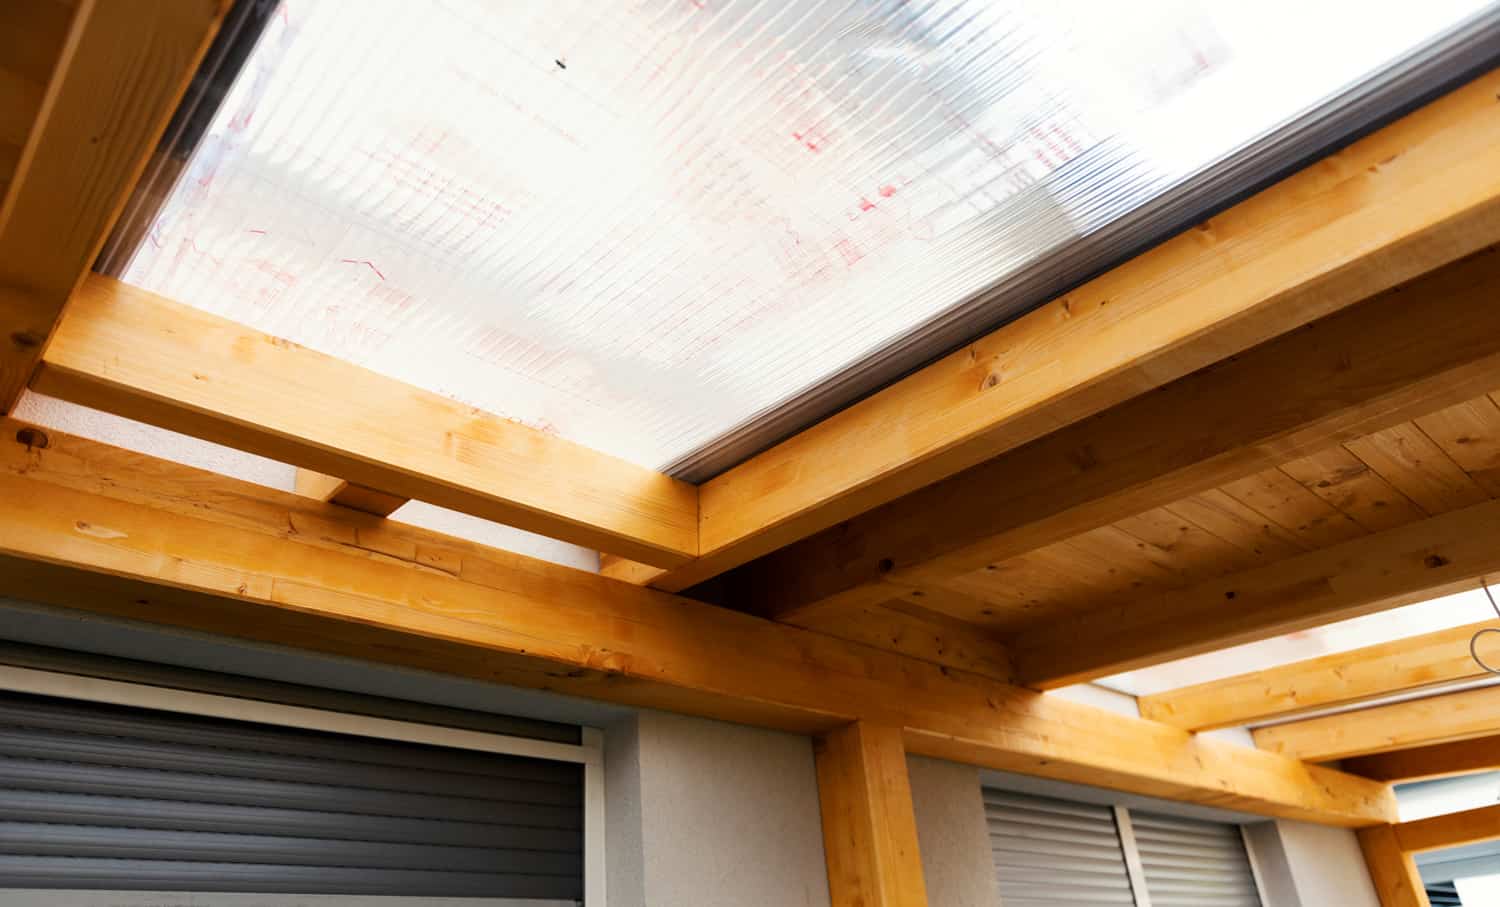 Massive wood beams roof structure covered with transparent polycarbonate sheet, wooden canopy